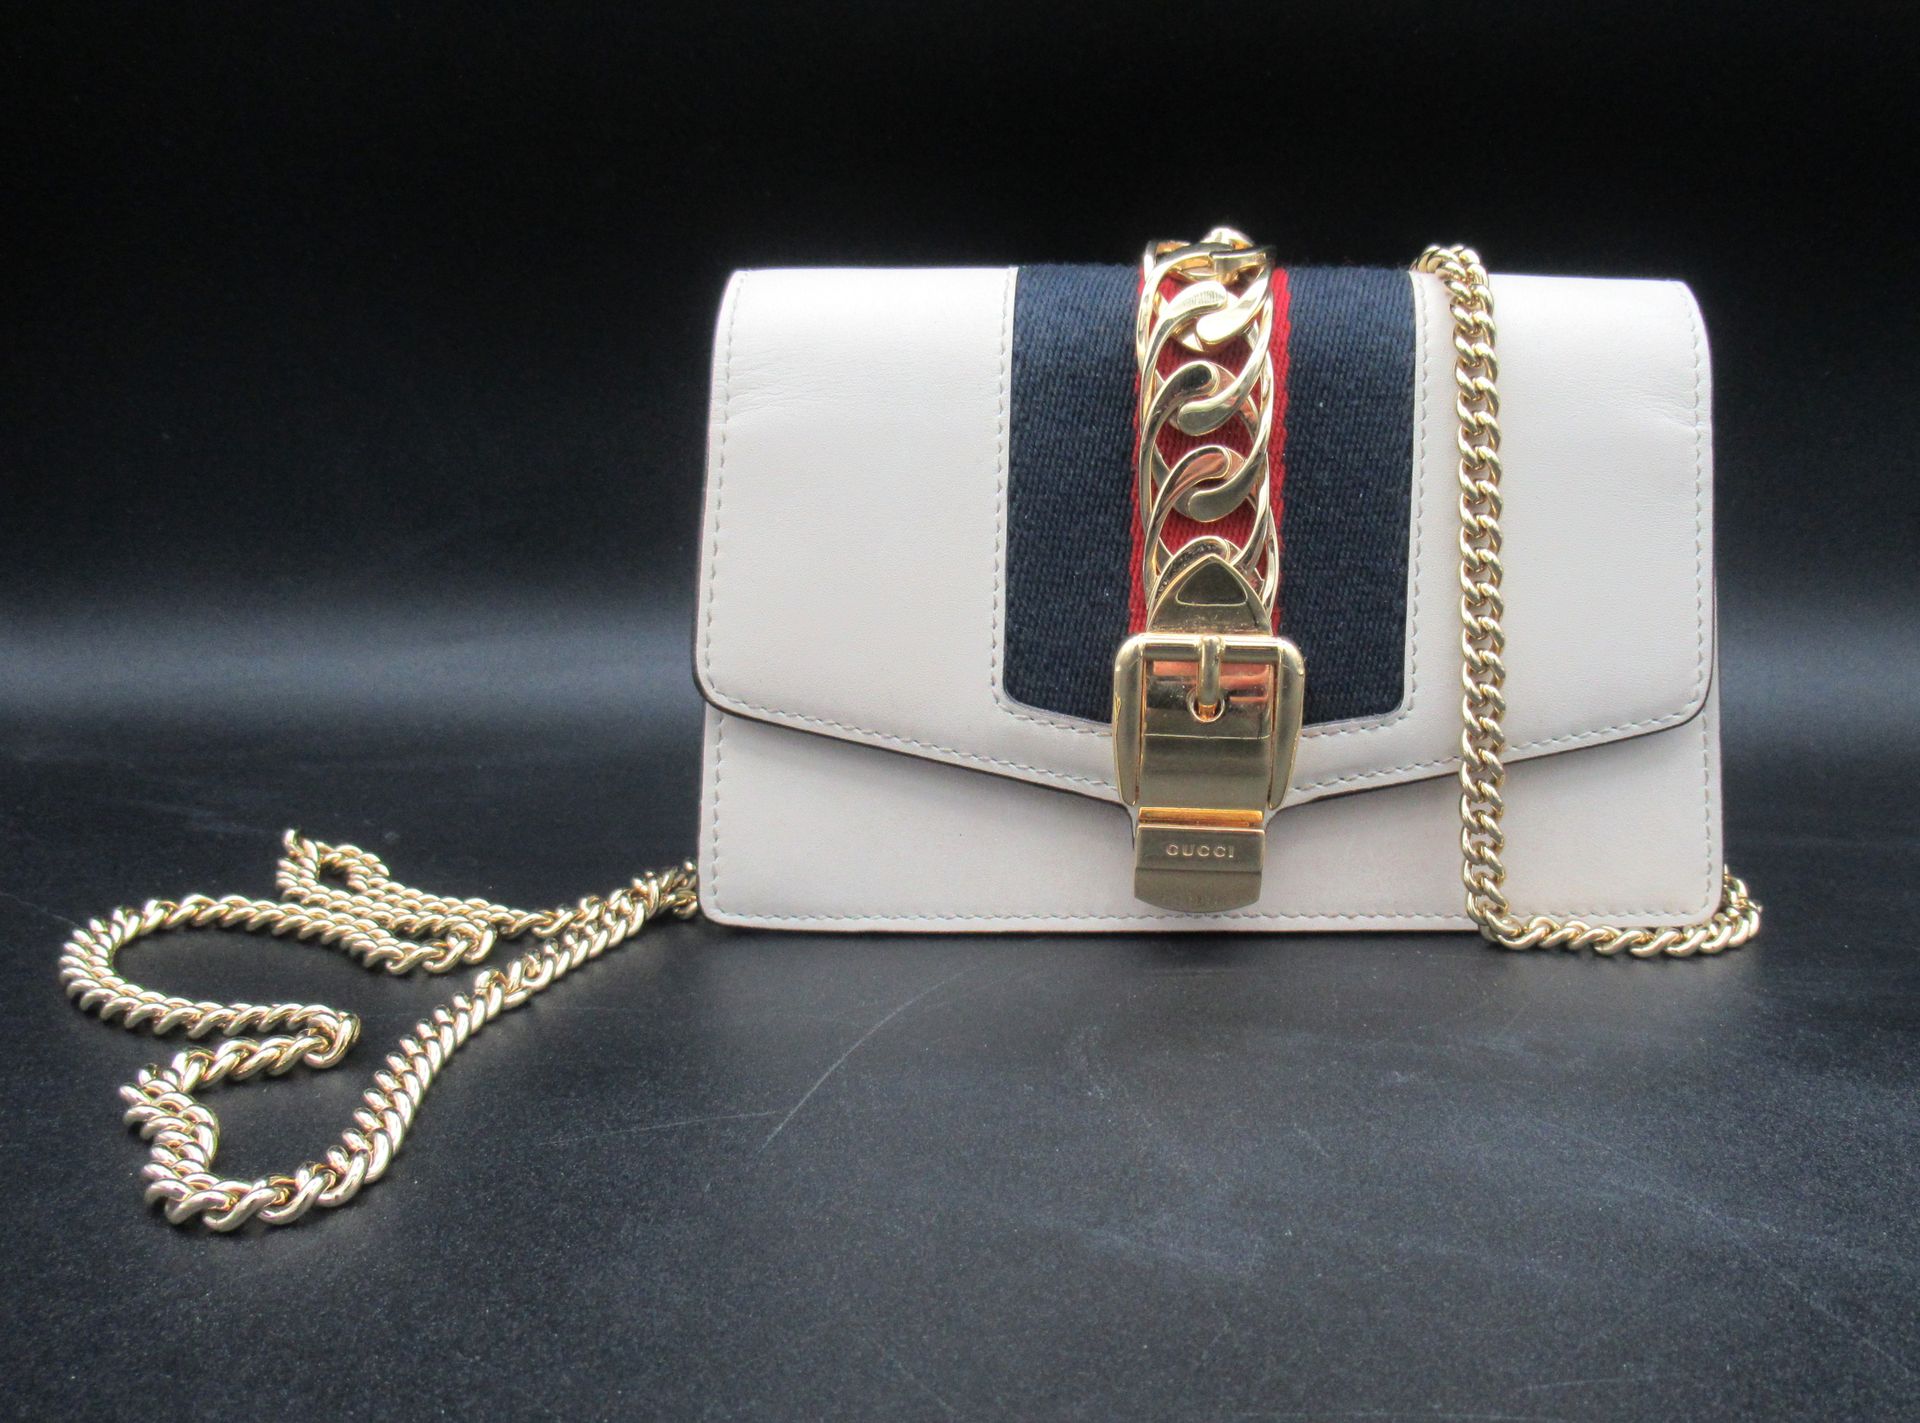 GUCCI Mini Sylvie bag, leather and fabric with gold chain handle. 17 x 11 x 4 cm